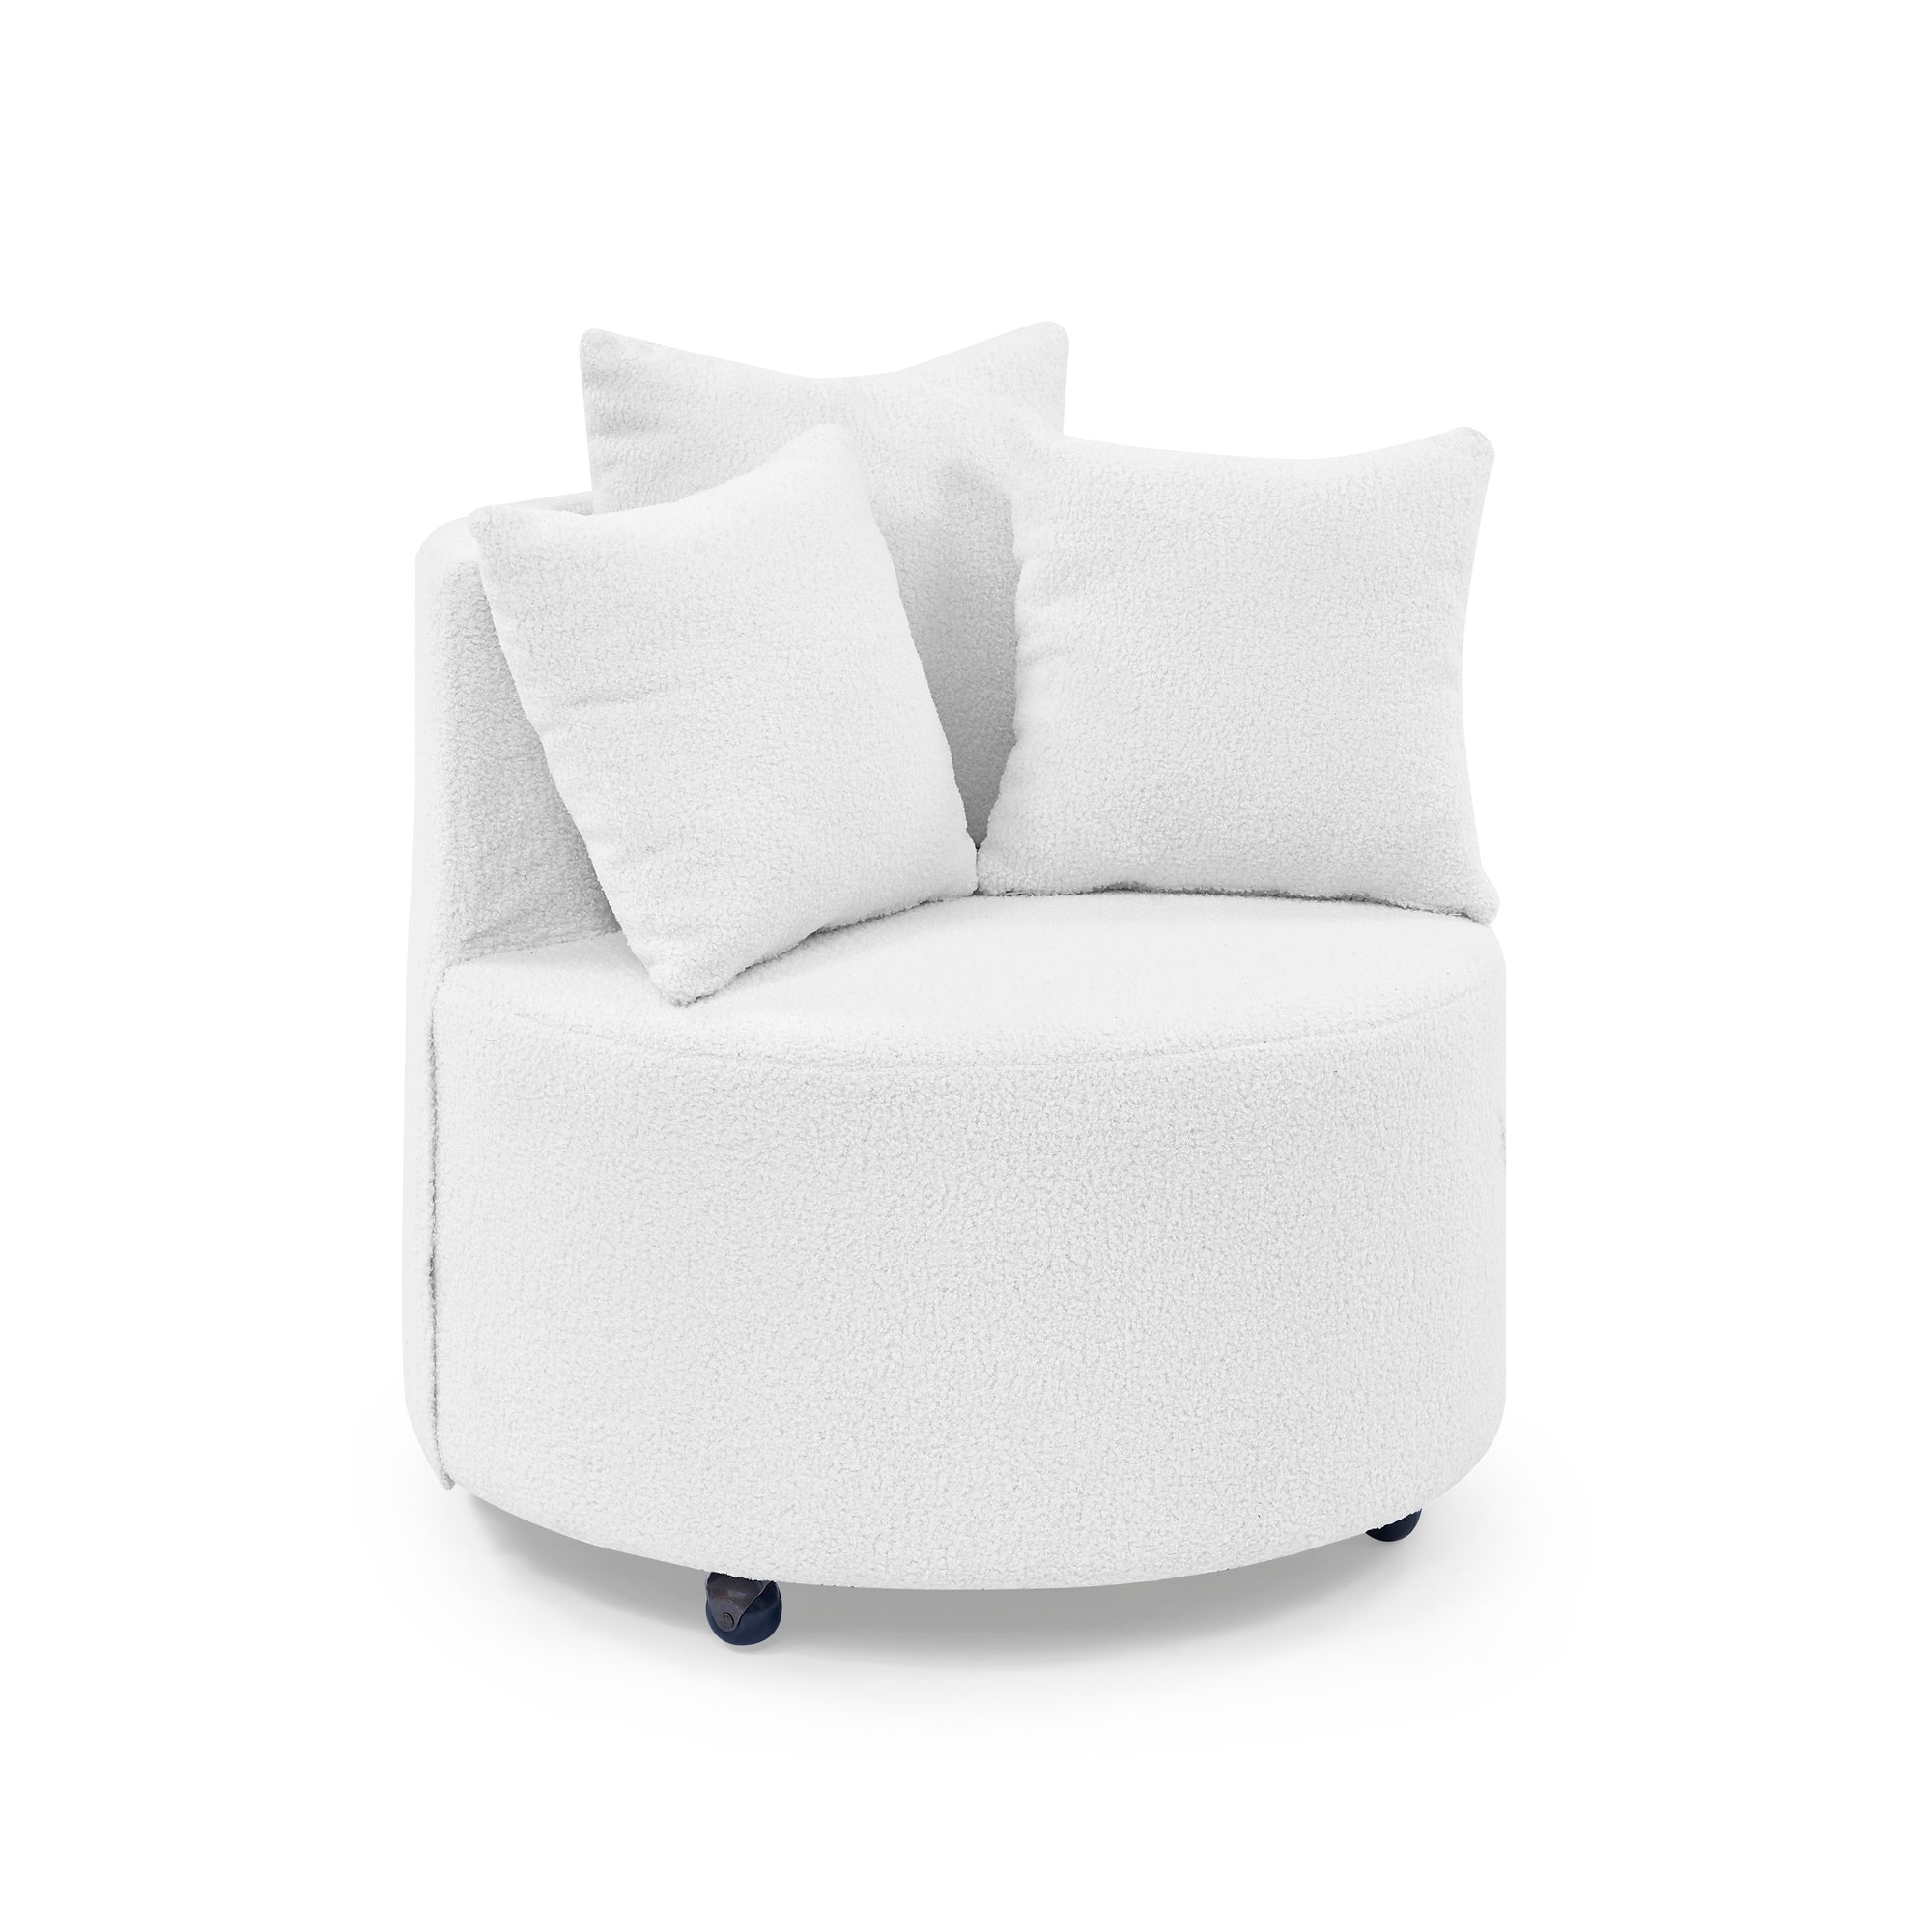 Teddy Fabric Swivel Accent Backchair Upholstered Luxury Lounge Chair with Movable Wheels, Including 3 Pillows - White